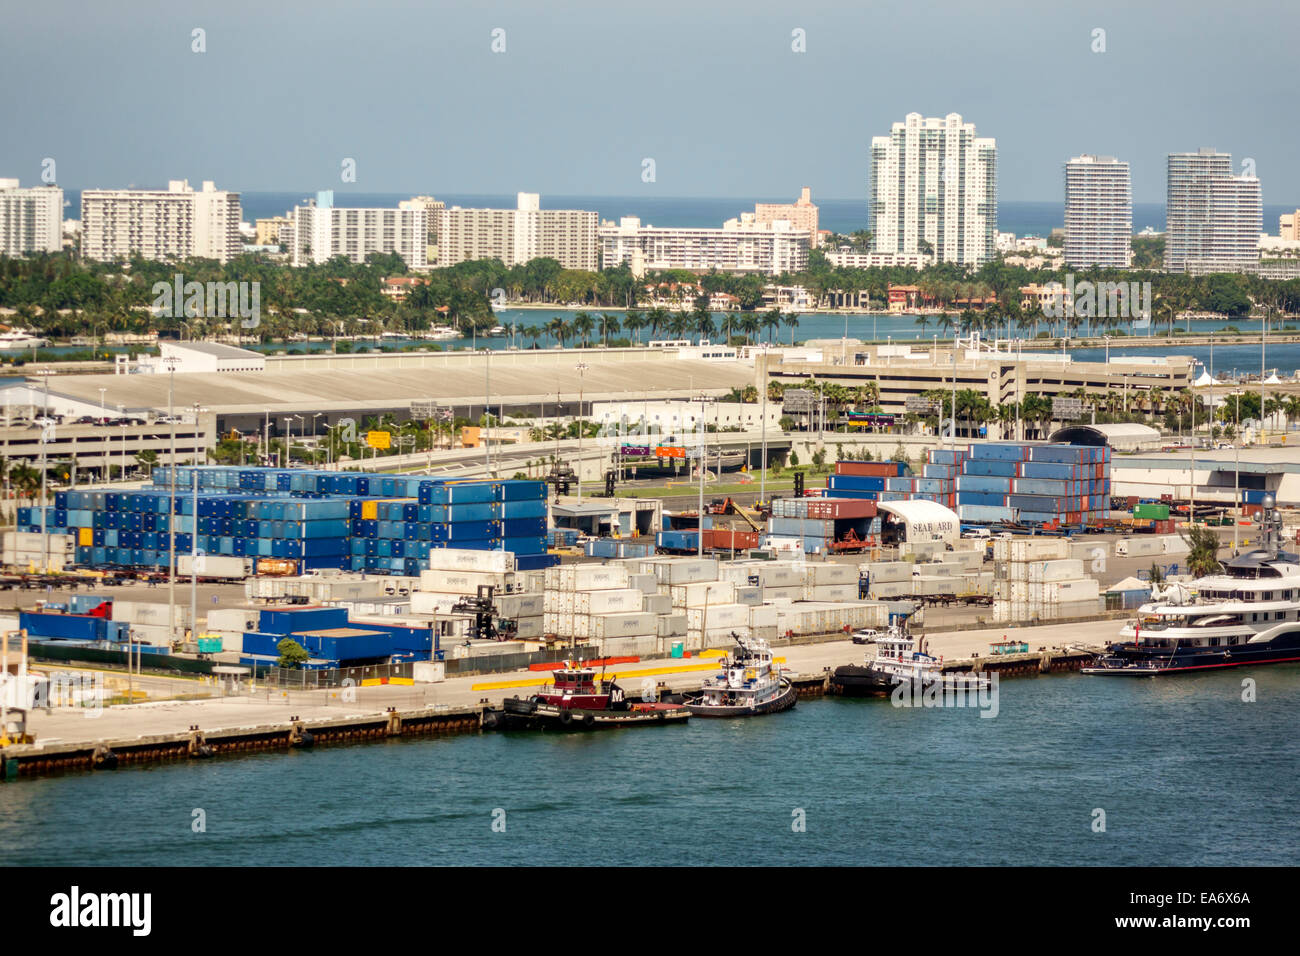 Miami Florida,Port of Miami,Miami Beach,Biscayne Bay,cargo containers,aerial overhead view from above,high rise,condominium buildings,FL140808008 Stock Photo